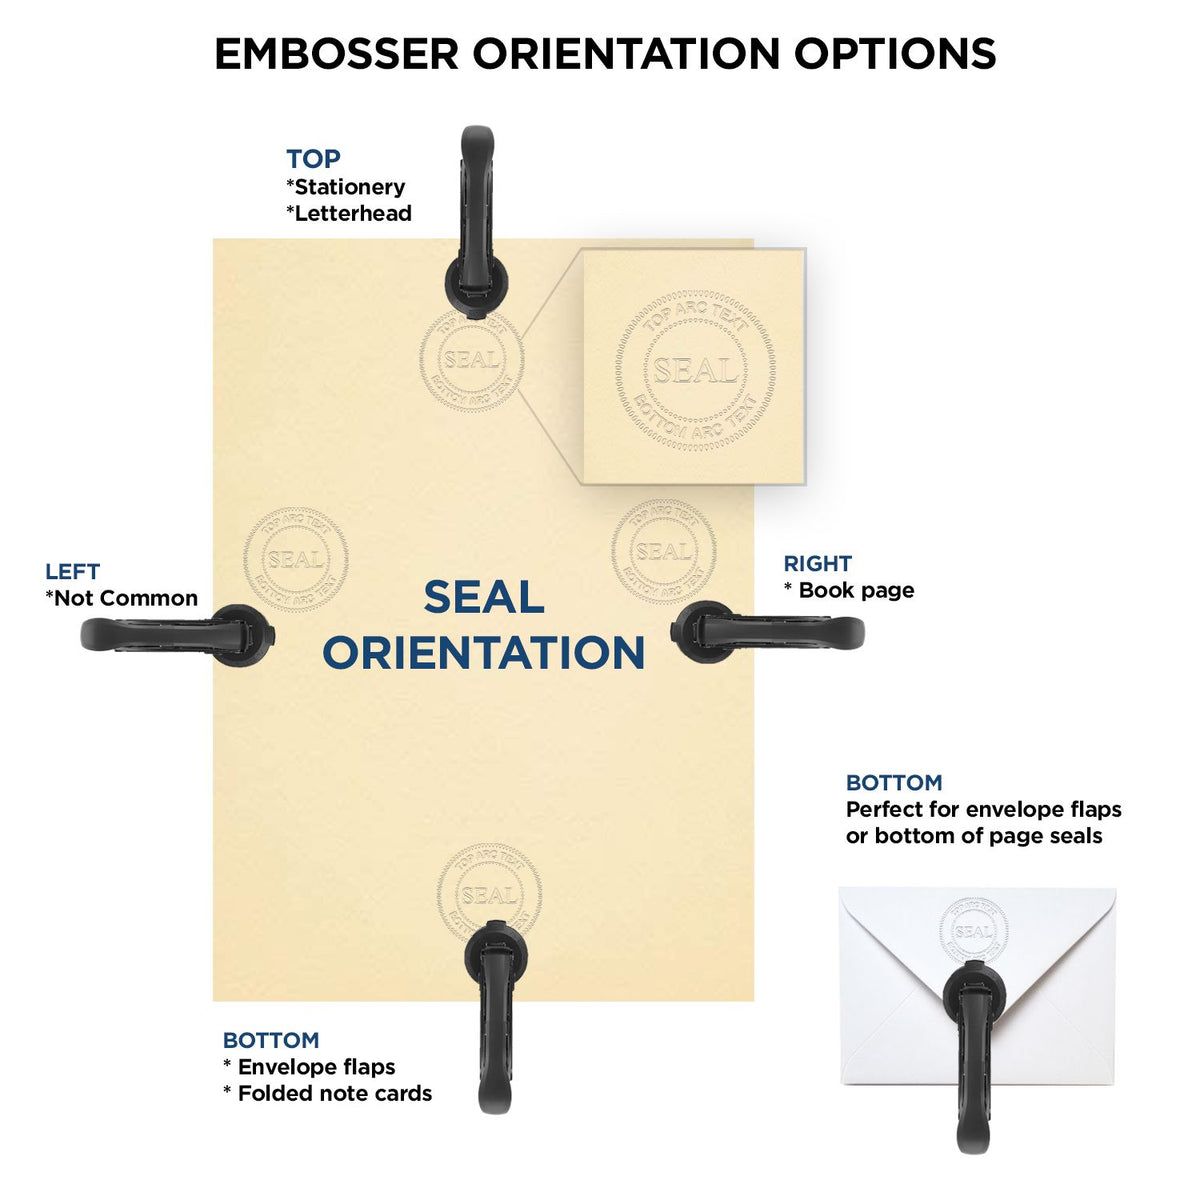 An infographic for the Kentucky Engineer Desk Seal showing embosser orientation, this is showing examples of a top, bottom, right and left insert.